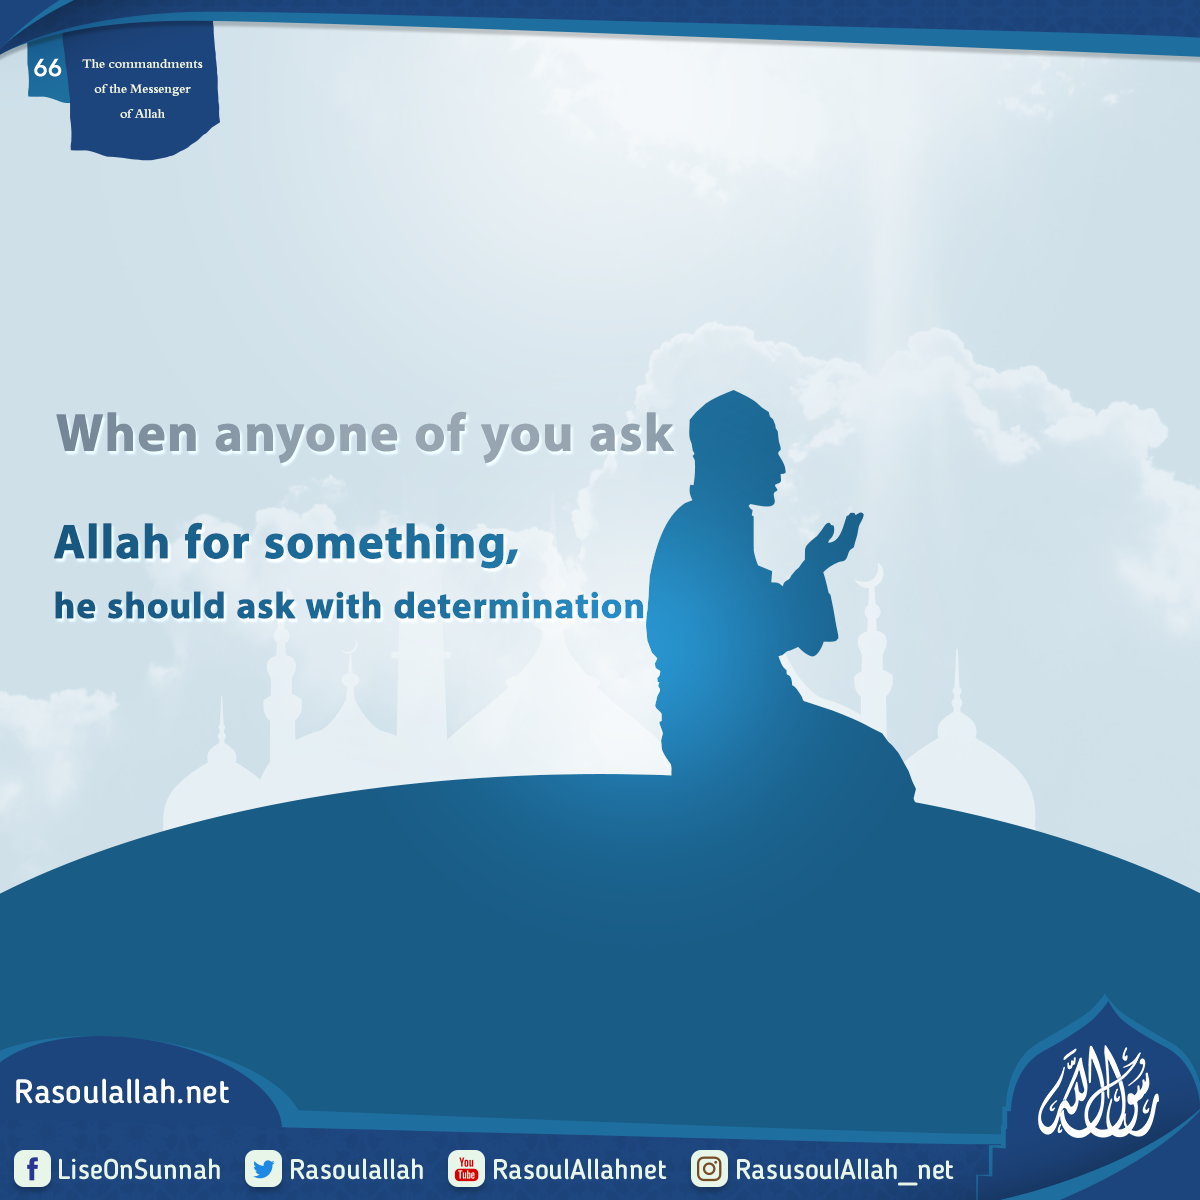 When anyone of you ask Allah for something, he should ask with determination